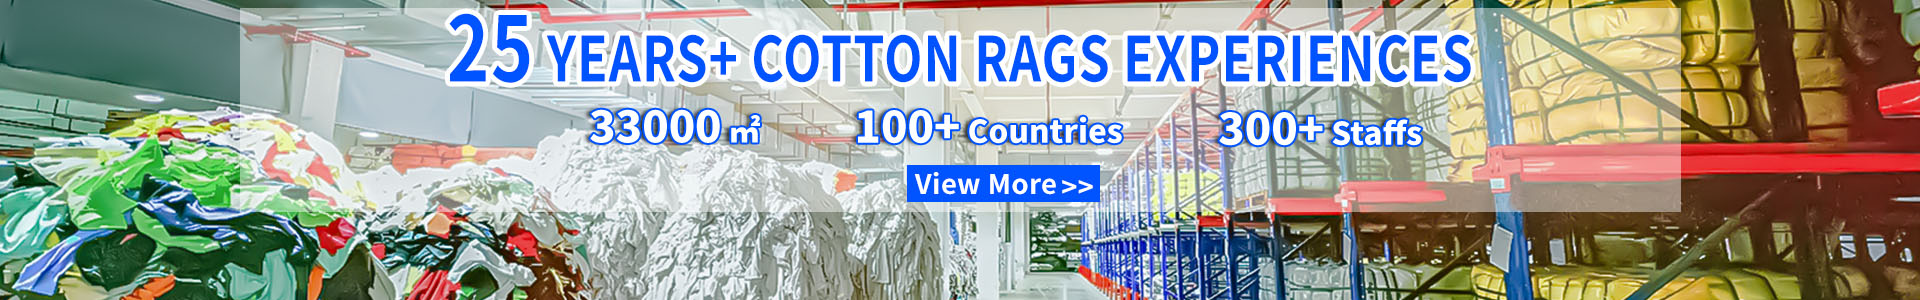 About Us |Cotton Rags